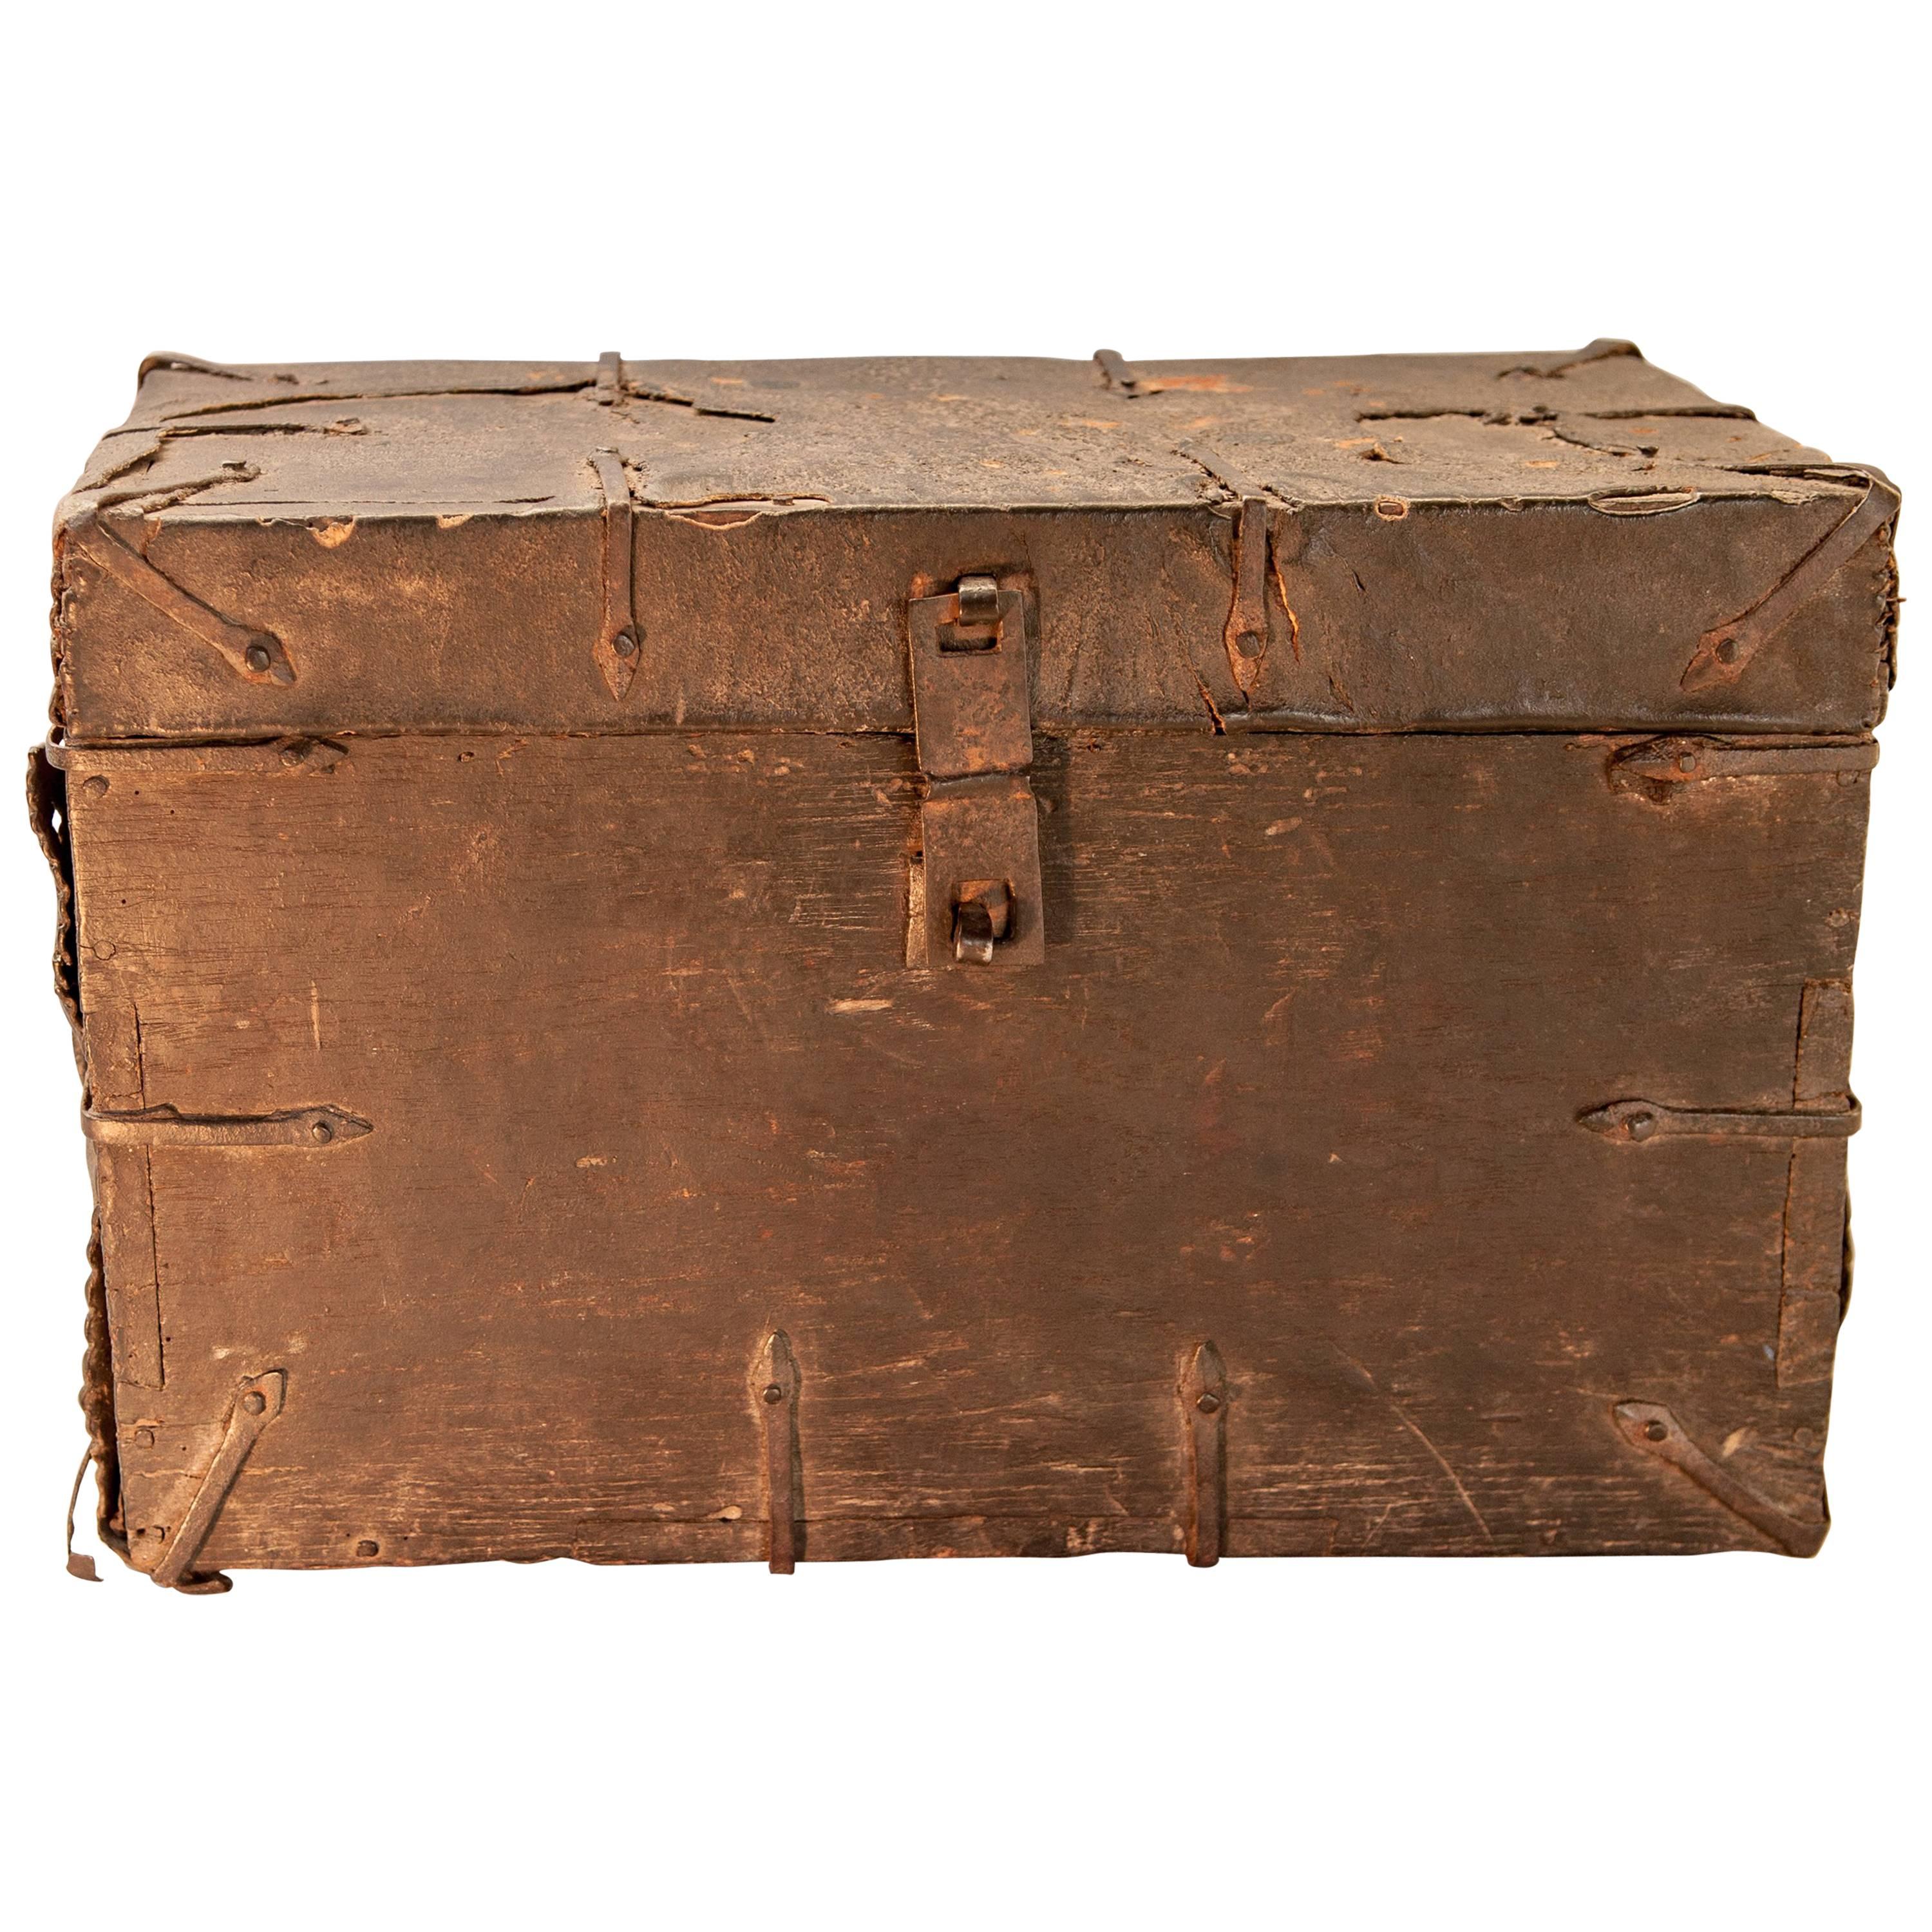 Vintage Wooden and Leather Chest from Tibet, Early-Mid 20th Century.